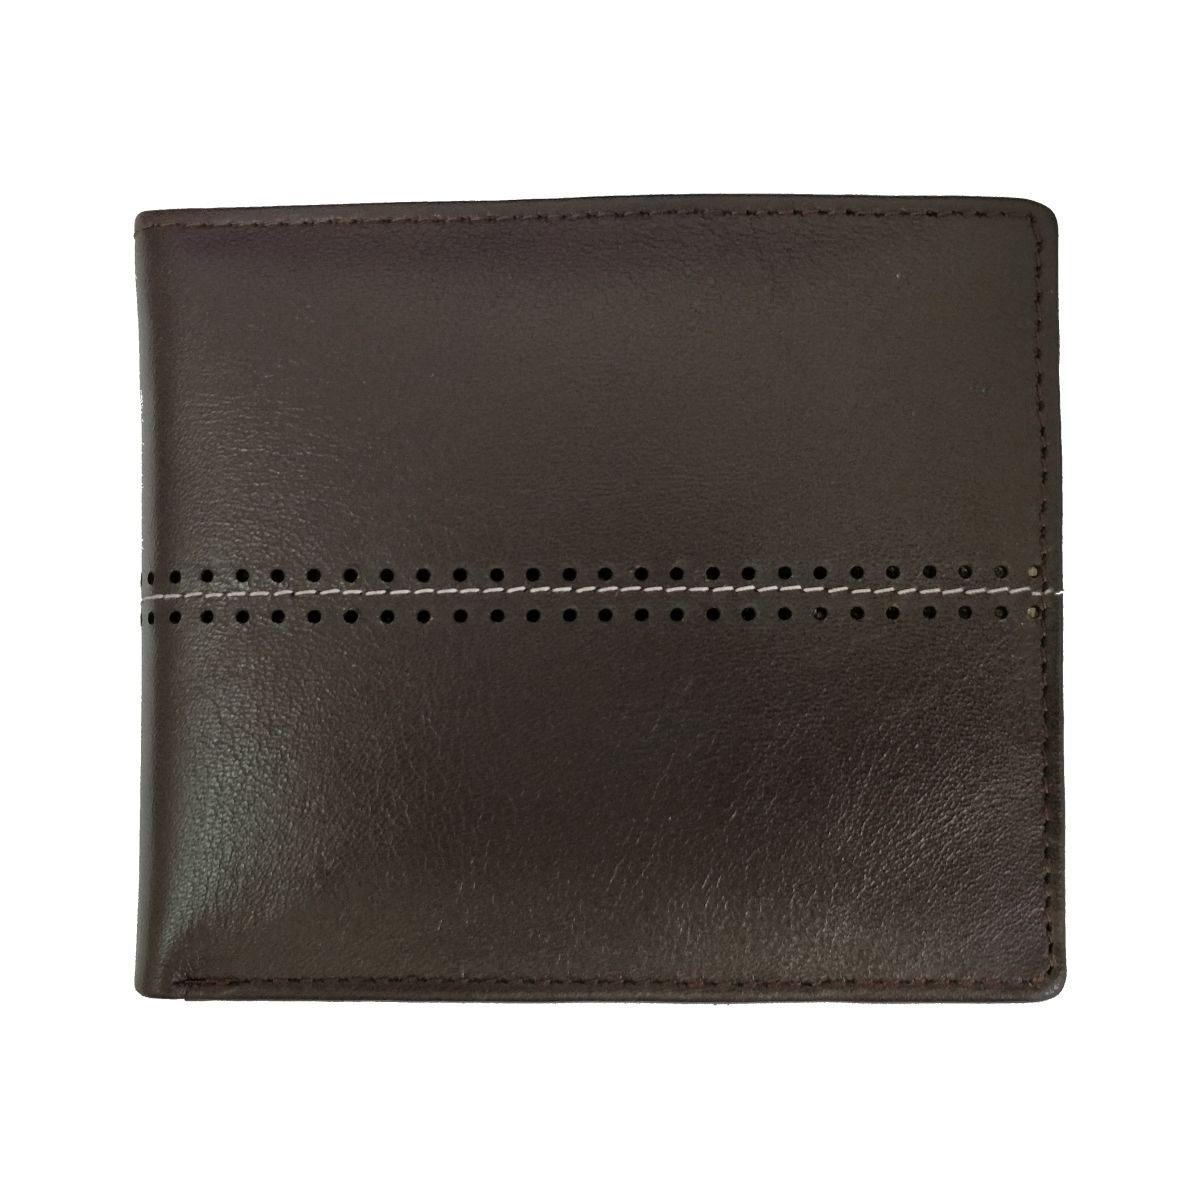 Leather Wallet With Horizontal Stitch and Coin Pouch - Dark Brown